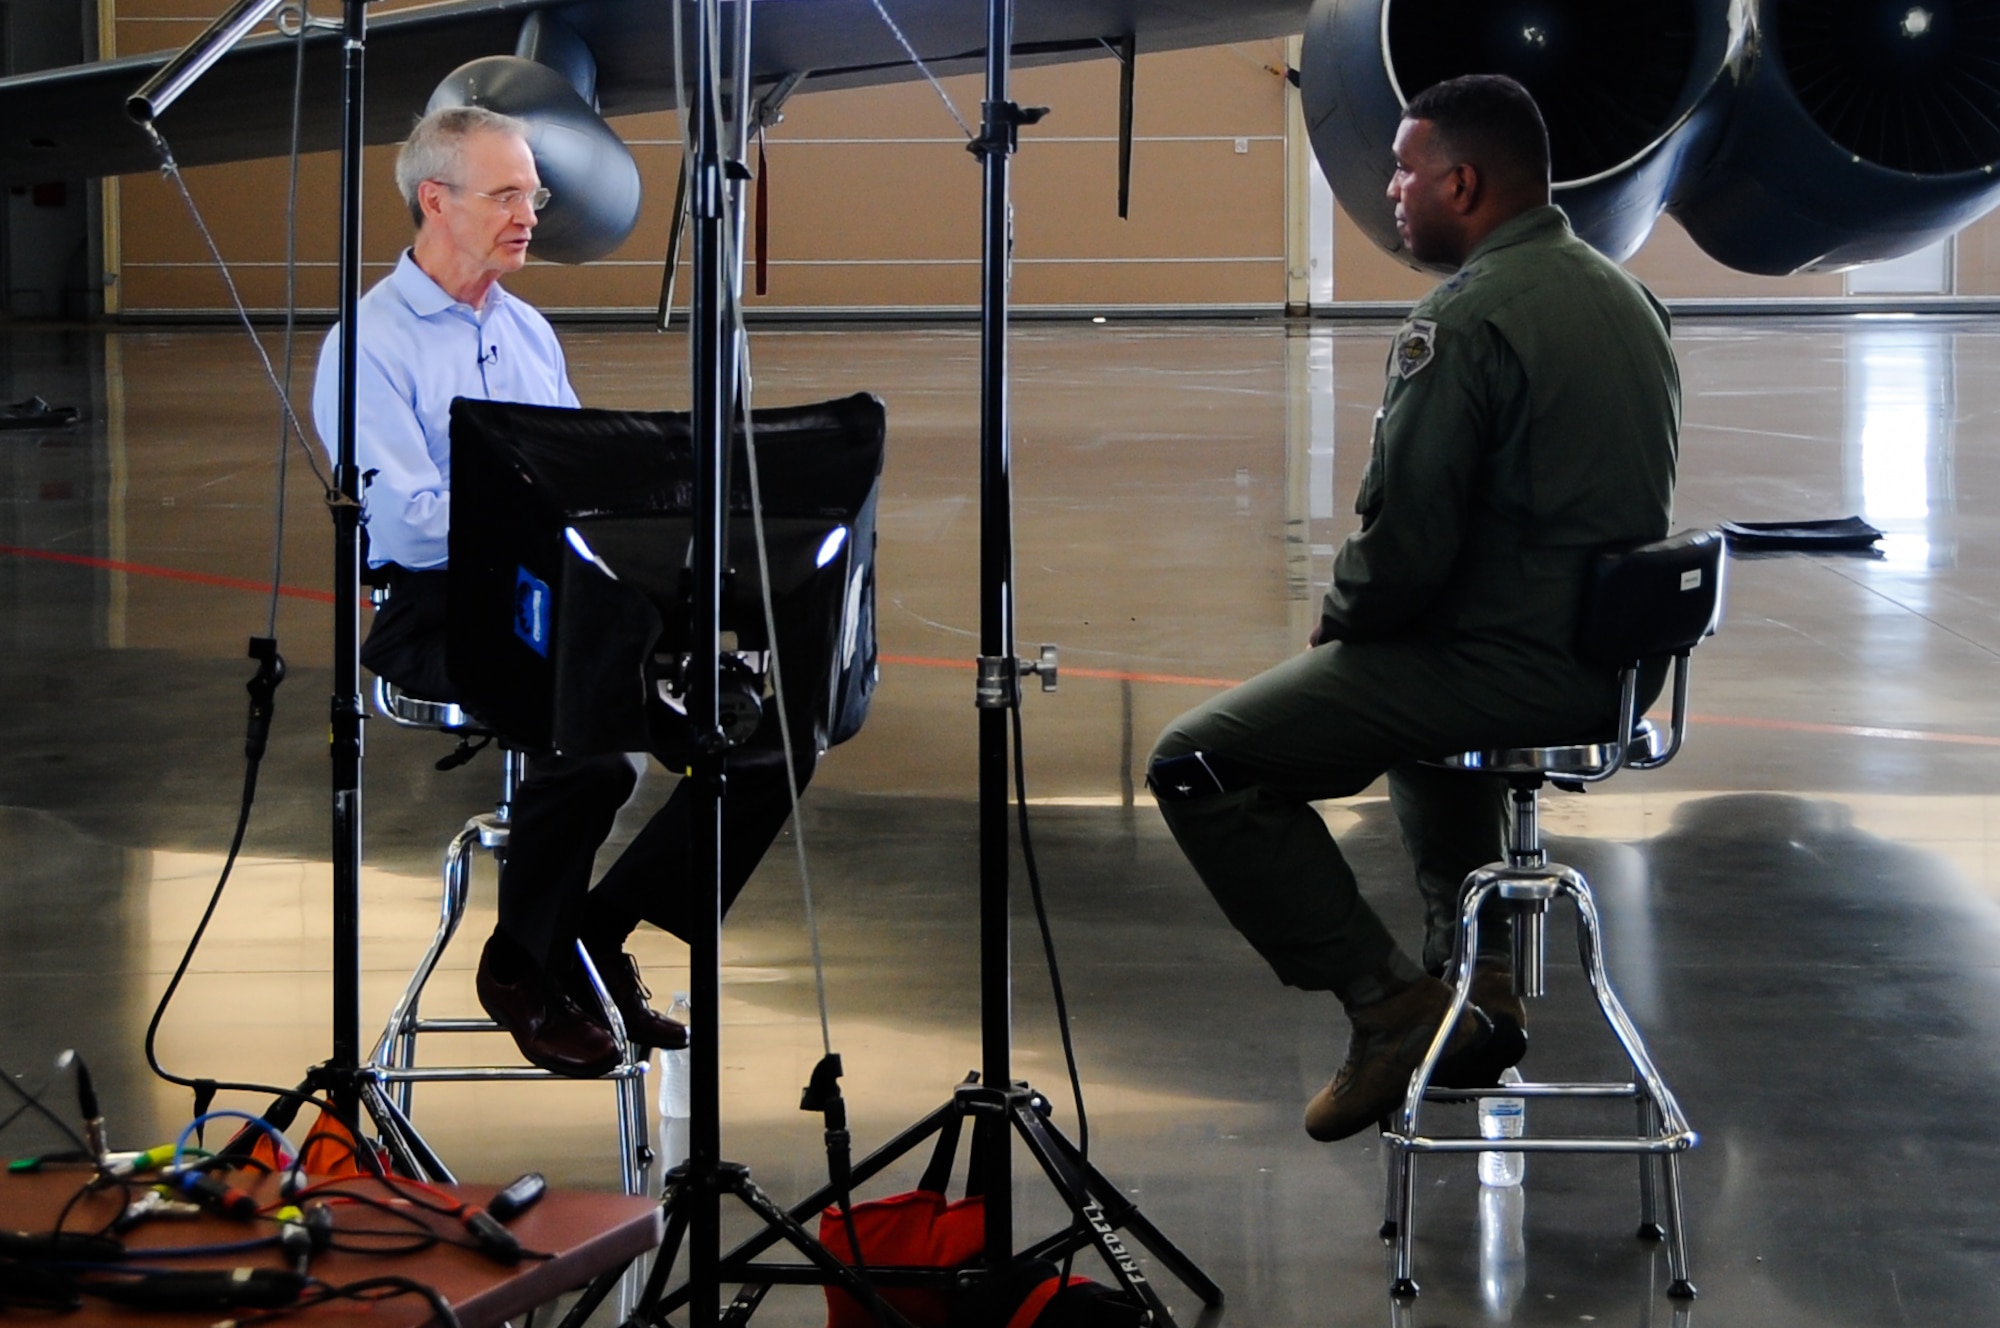 Reporter David Martin from the CBS show 60 Minutes interviews U.S. Air Force Maj. Gen. Richard M. Clark, Eighth Air Force commander, about recent nuclear-capable bomber exercises in the Arctic region during a filming at Barksdale Air Force Base, La., Sept. 8, 2016. Operations Polar Roar and Polar Growl, both U.S. Strategic Command-led exercises that incorporate the B-52 and B-2, were specifically addressed. The CBS segment, which focuses on all three legs of the U.S. nuclear triad, is scheduled to air this fall. (U.S. Air Force photo by A1C Stuart Bright)